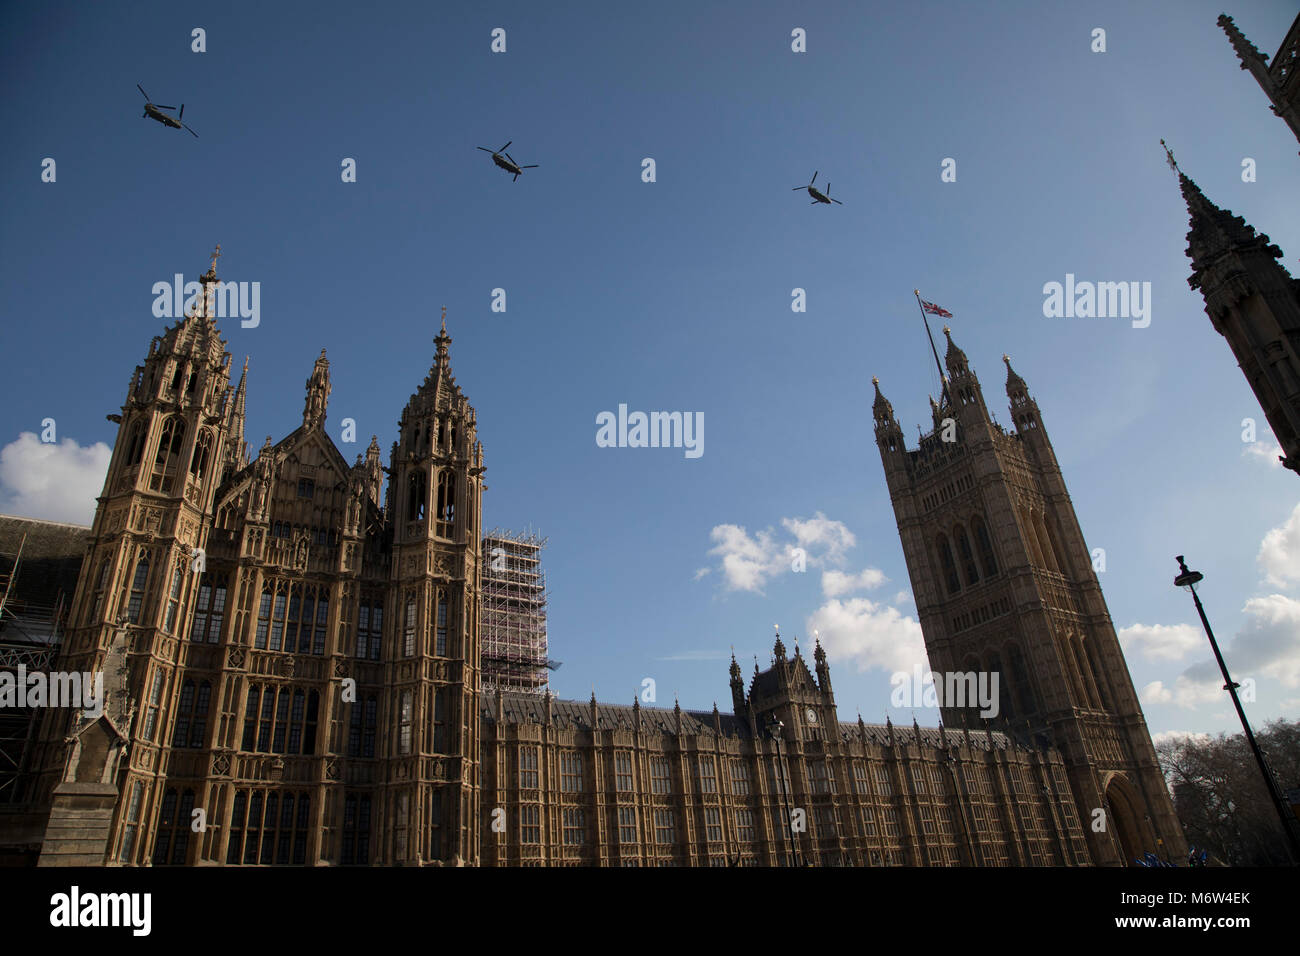 Chinook helicopters fly over the Houses of Parliament in London, England, United Kingdom. Part of a network of routes, known as the heli-lanes through London where helicopters can fly visually without needing to satisfy the equipment requirements of Class A Airspace. Stock Photo